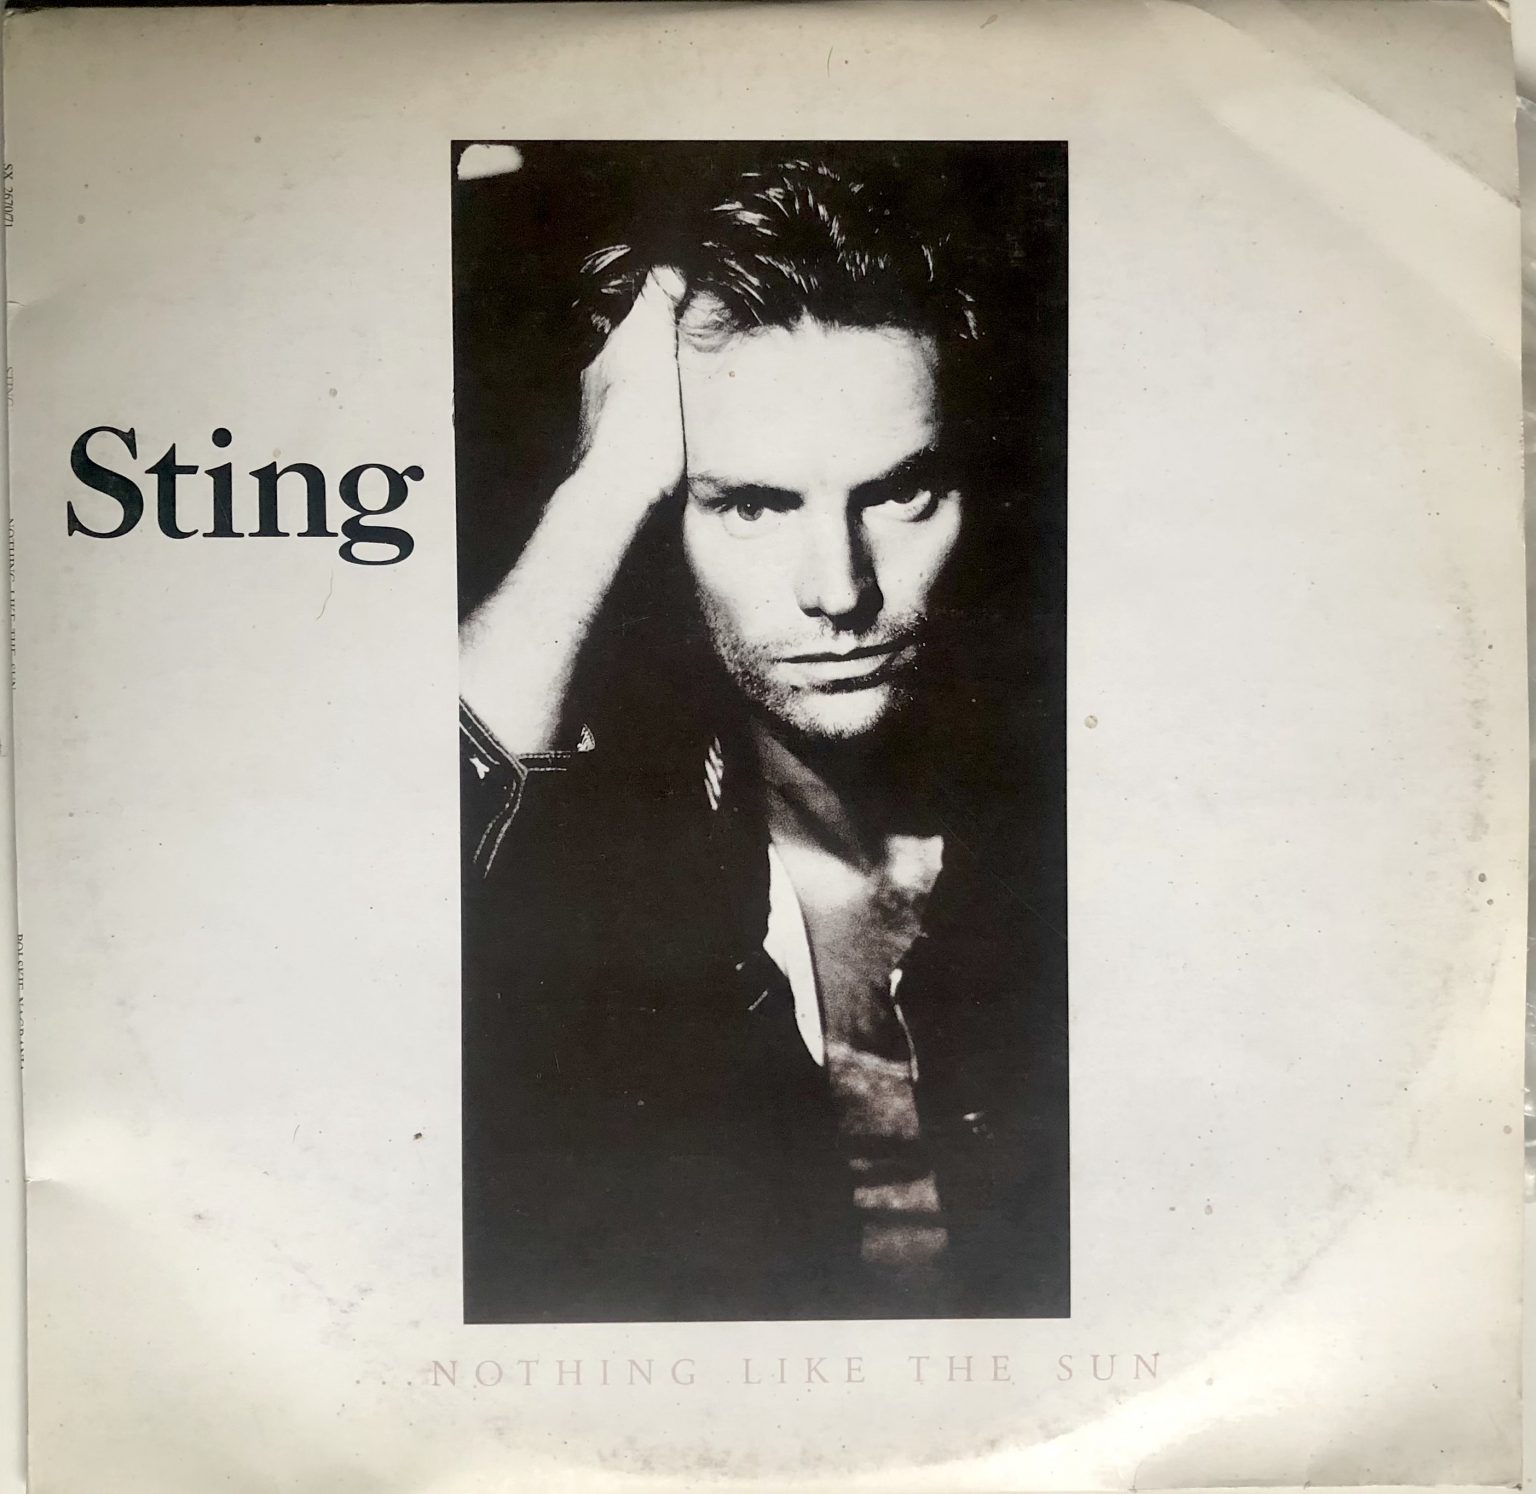 Sting – … Nothing like the sun